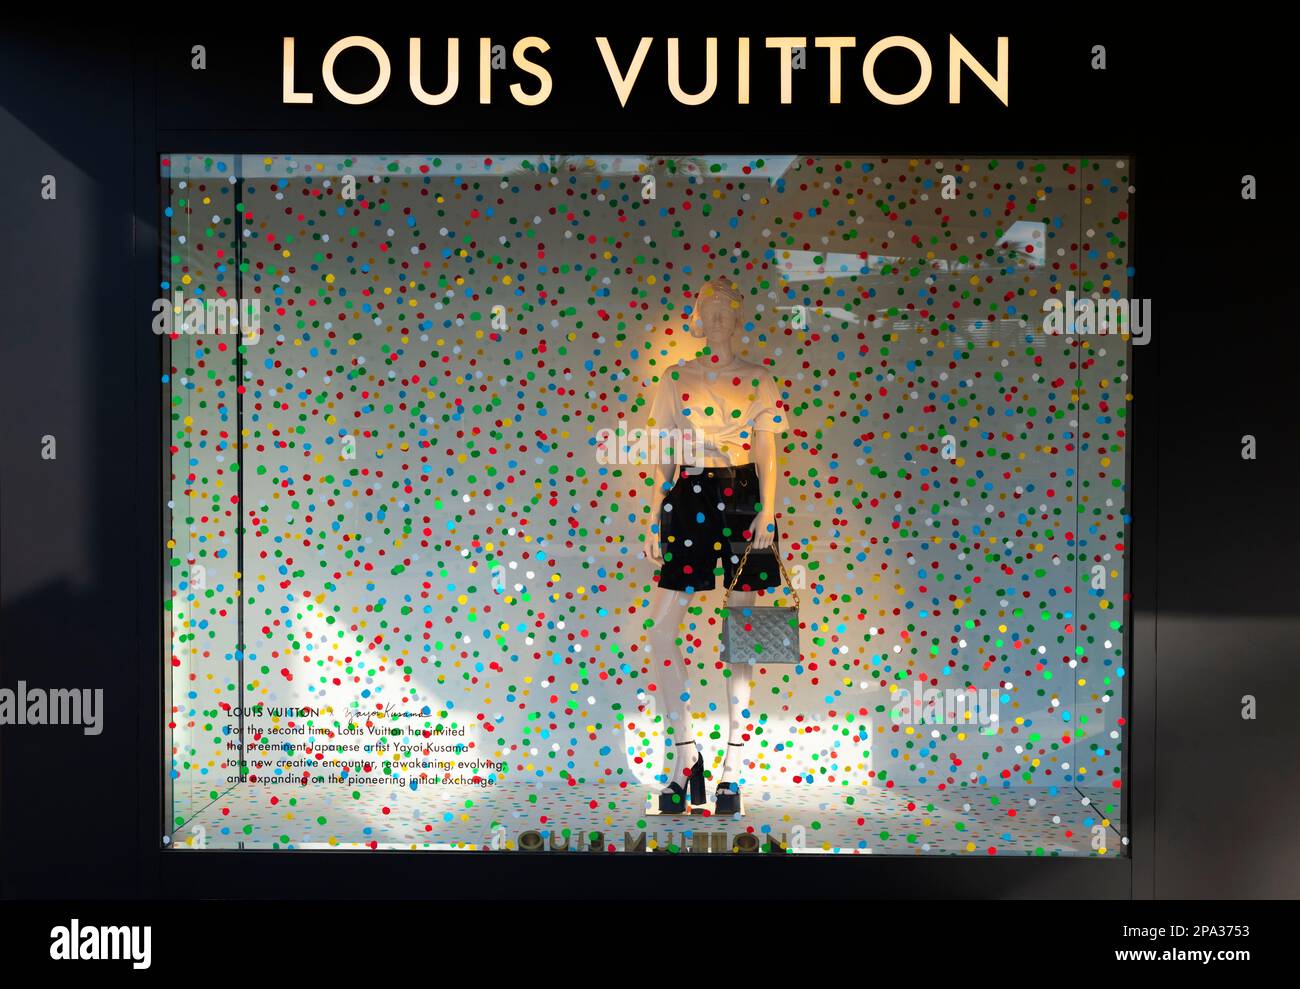 Louis Vuitton window design at the Waterside Shops. Stock Photo